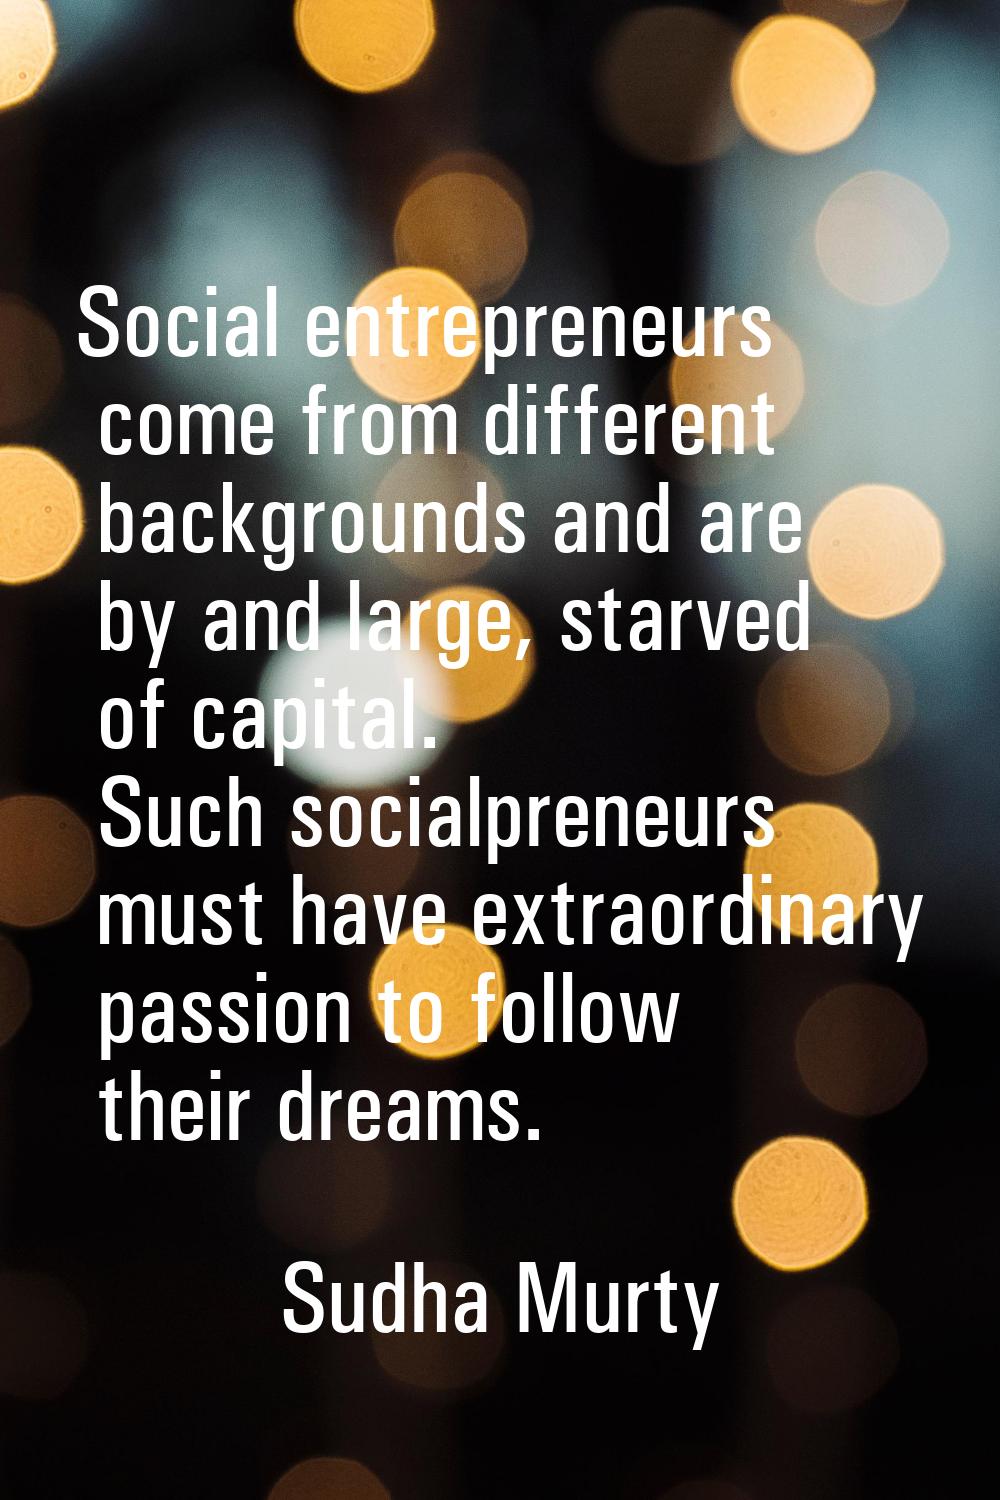 Social entrepreneurs come from different backgrounds and are by and large, starved of capital. Such